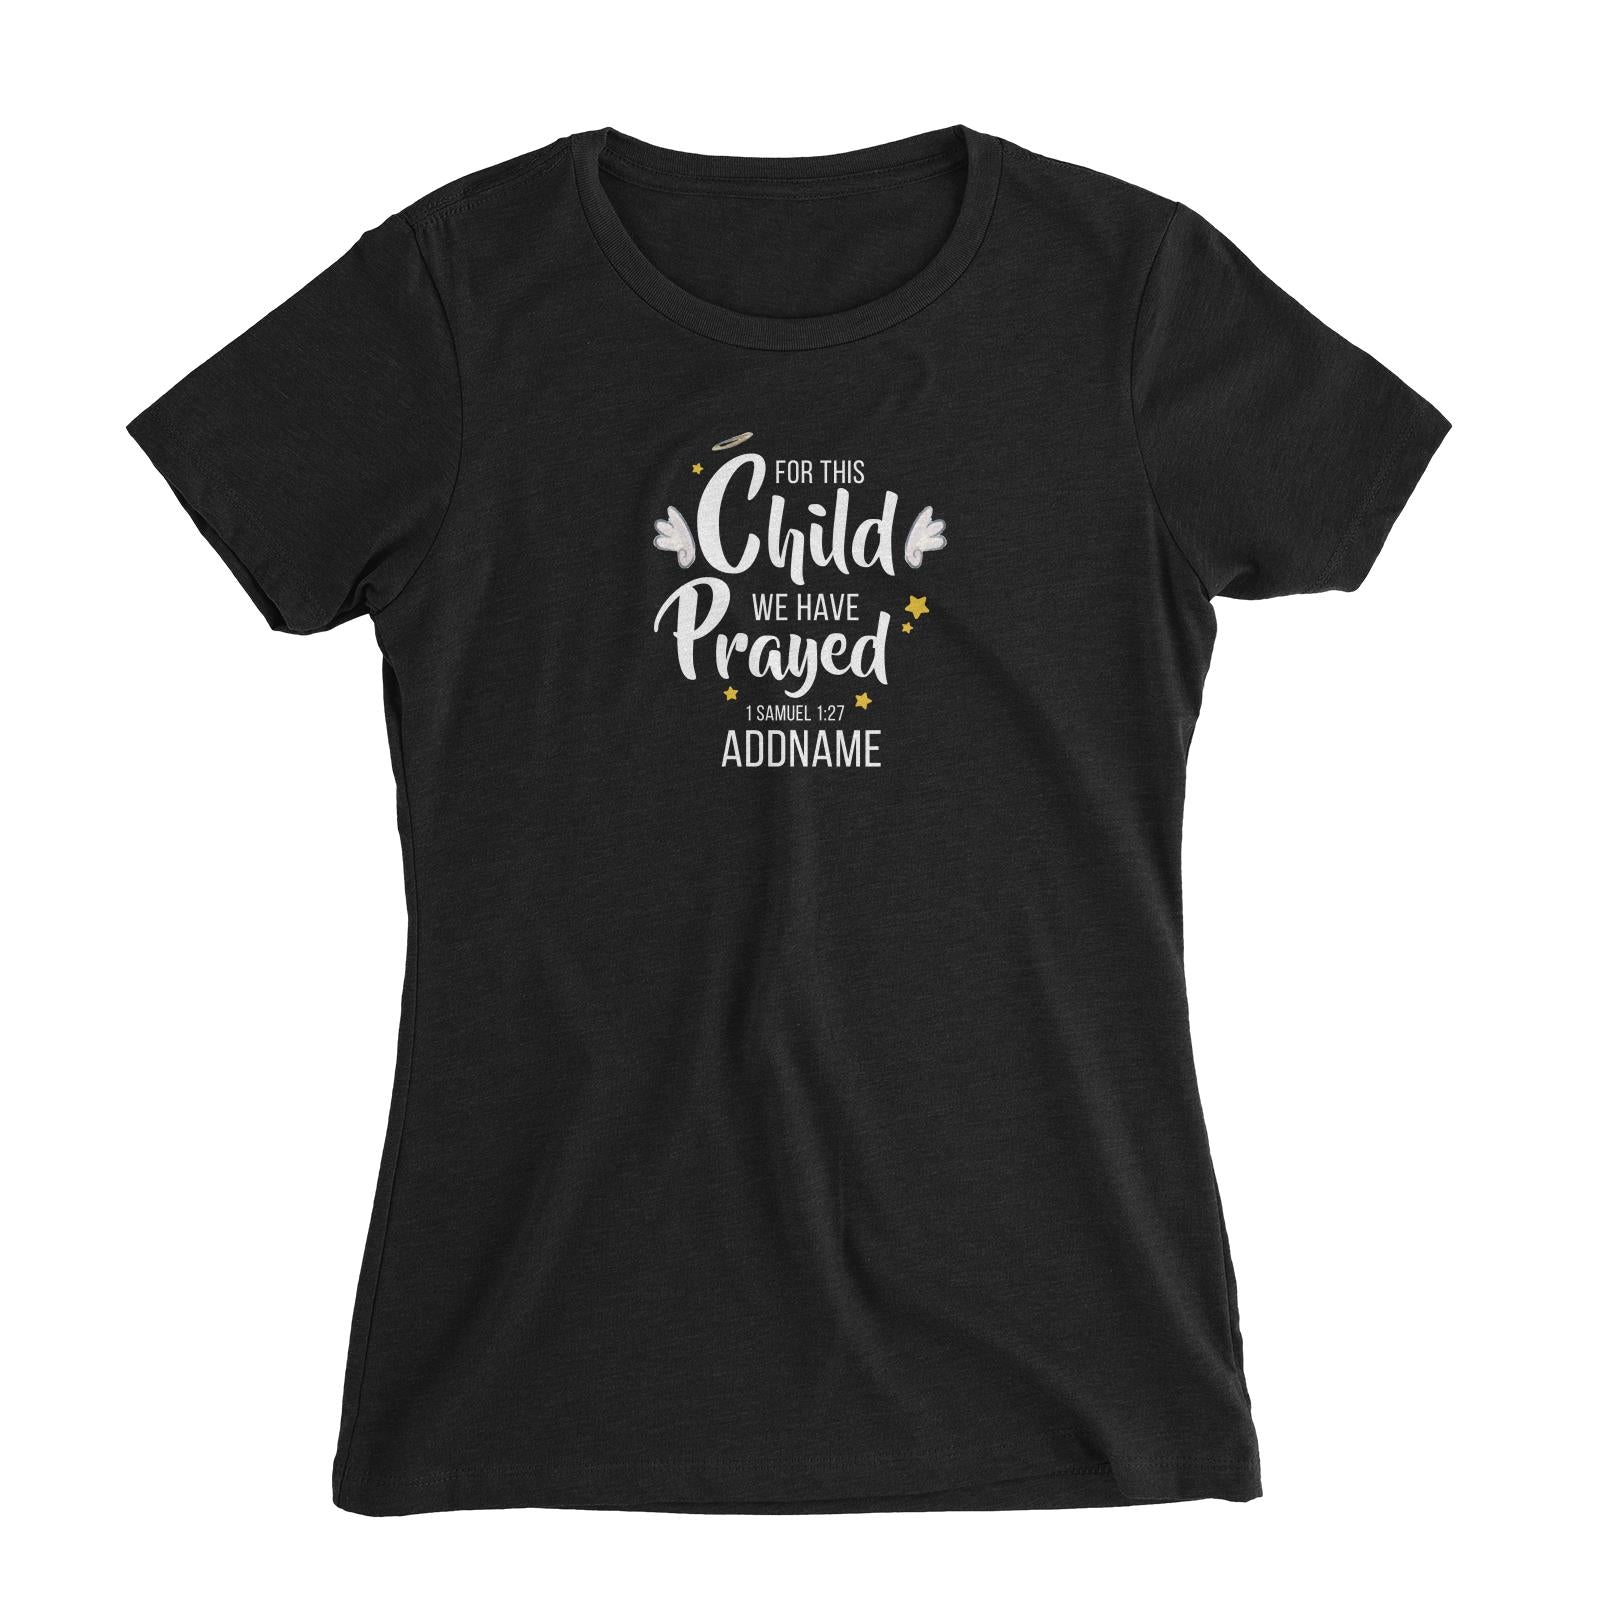 Gods Gift For This Child We Have Prayed 1 Samuel 1.27 Addname Women Slim Fit T-Shirt